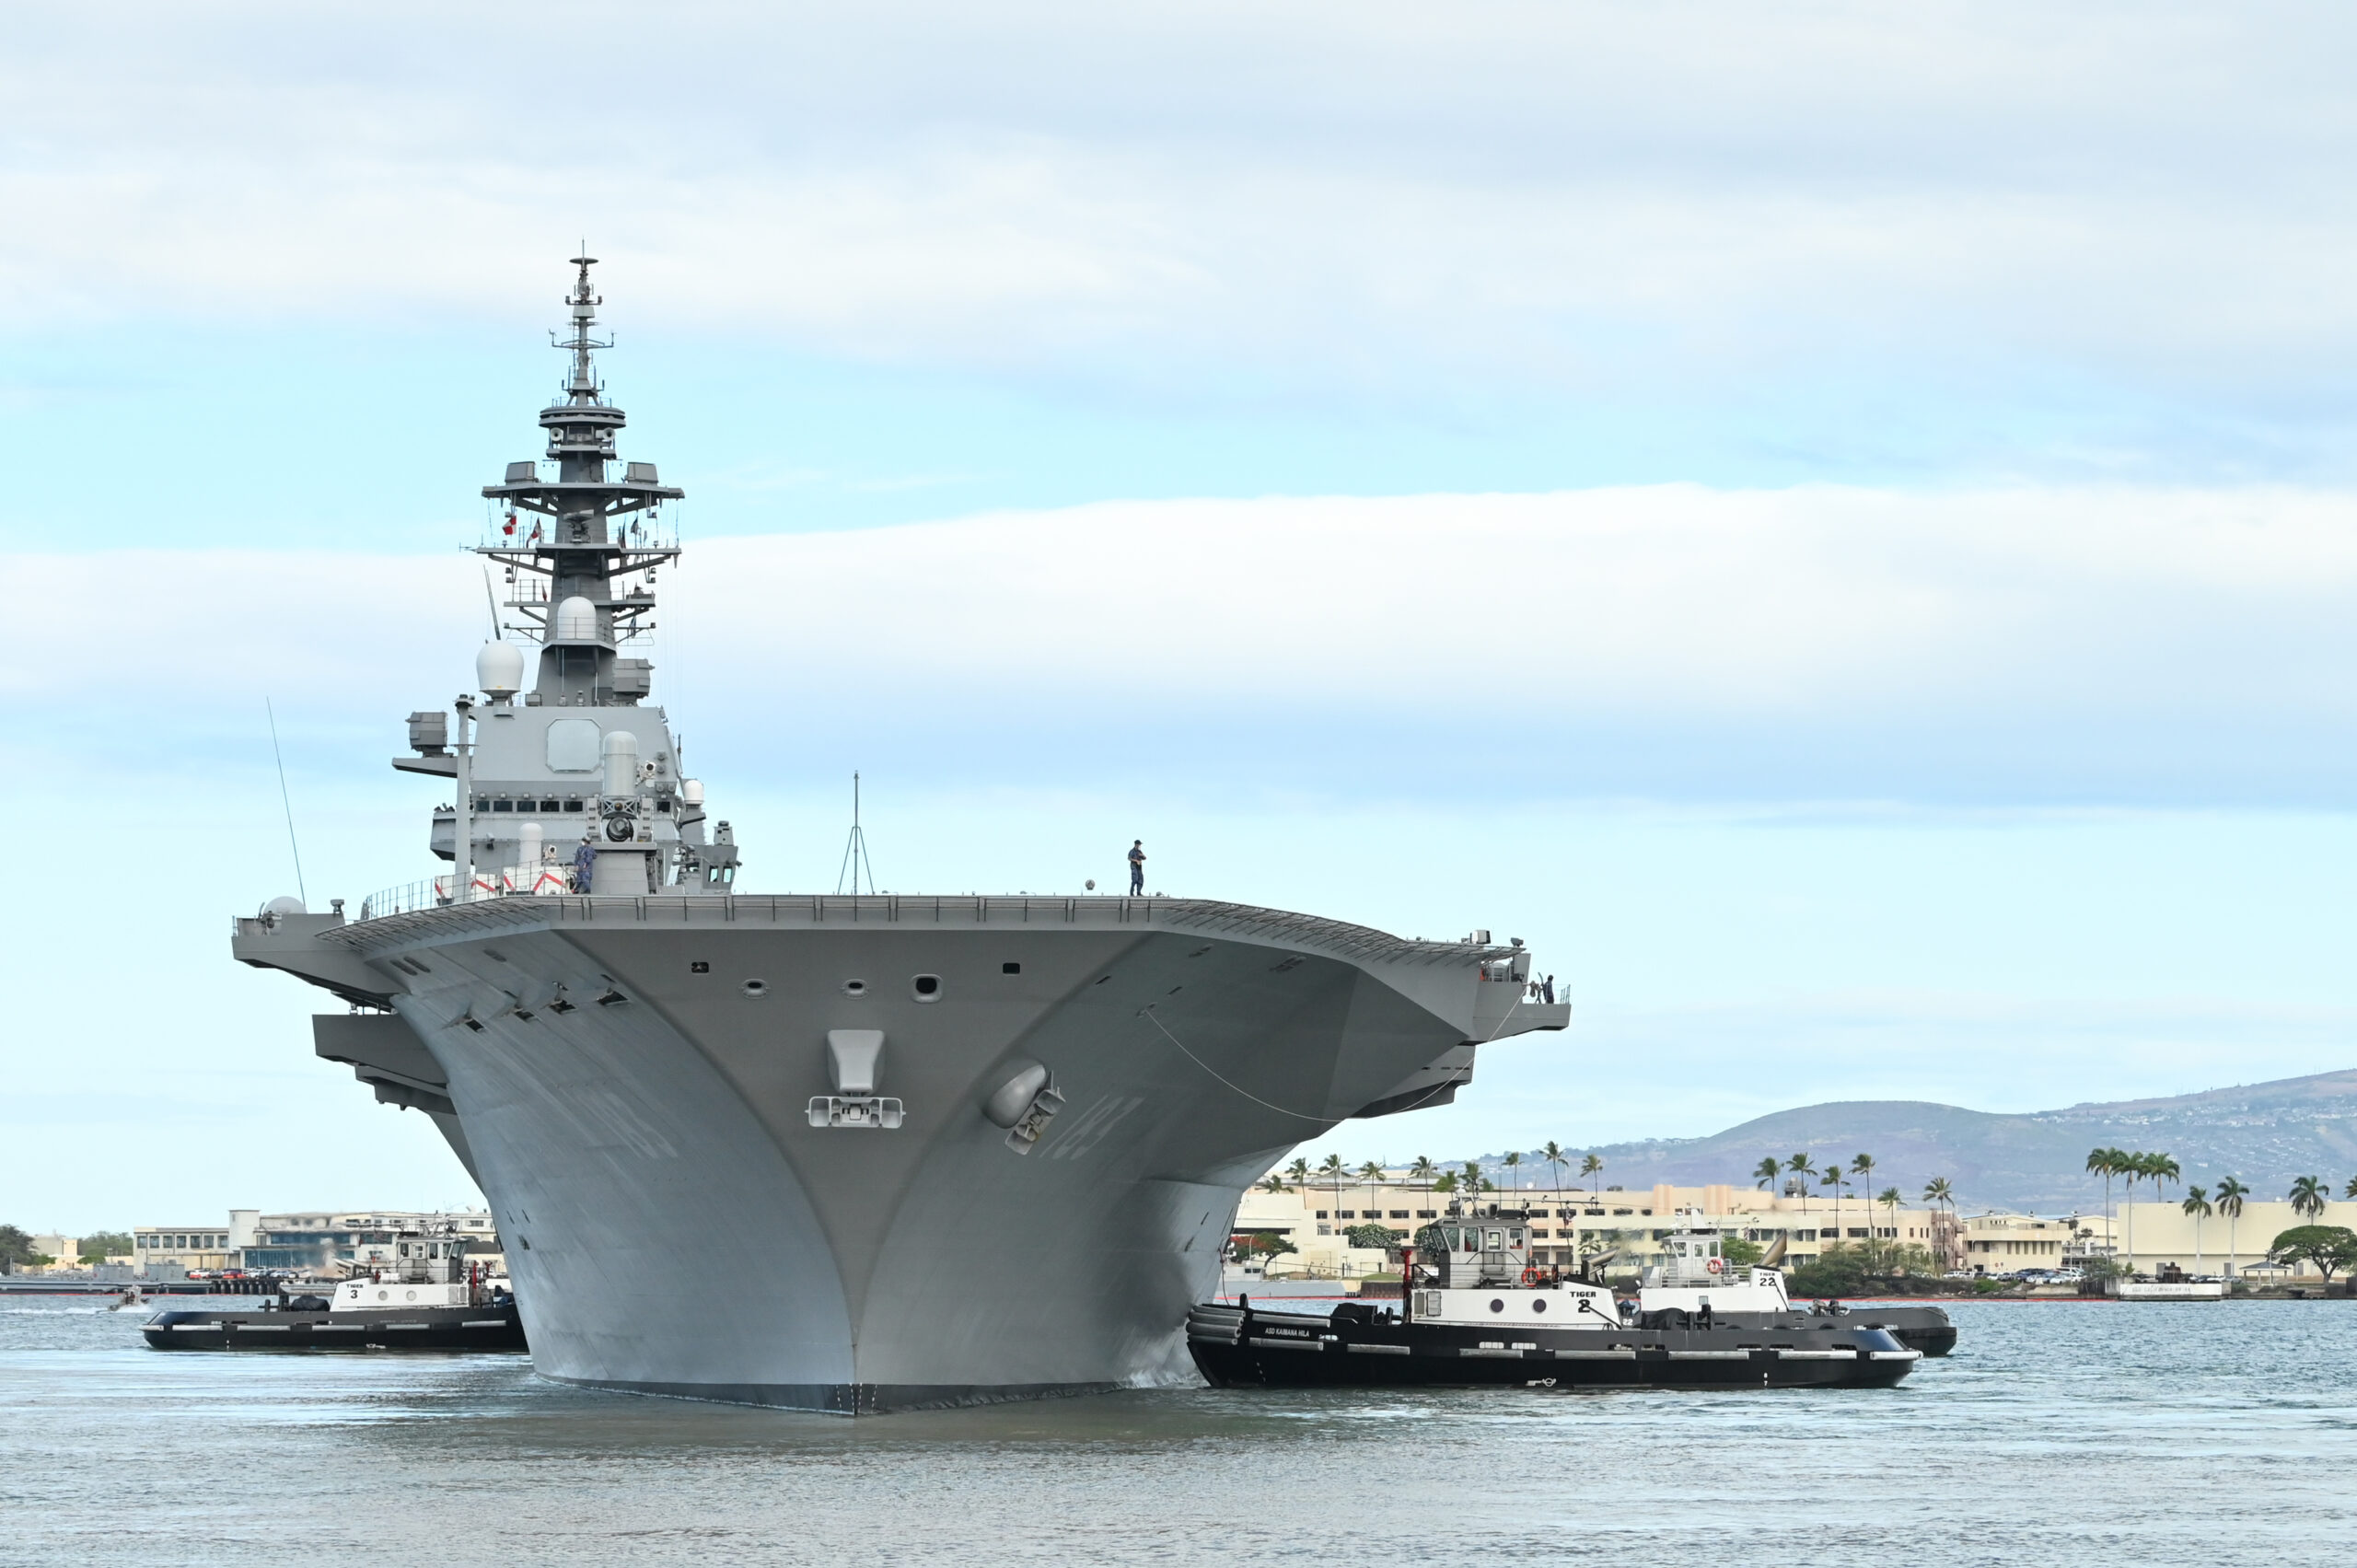 PEARL HARBOR (July 12, 2022) Japan Maritime Self-Defense Force helicopter destroyer JS Izumo (DDH 183) departs Pearl Harbor, July 12, to participate in the at-sea phase as part of Rim of the Pacific (RIMPAC) 2022. Twenty-six nations, 38 ships, three submarines, more than 170 aircraft and 25,000 personnel are participating in RIMPAC from June 29 to Aug. 4 in and around the Hawaiian Islands and Southern California. The world's largest international maritime exercise, RIMPAC provides a unique training opportunity while fostering and sustaining cooperative relationships among participants critical to ensuring the safety of sea lanes and security on the world's oceans. RIMPAC 2022 is the 28th exercise in the series that began in 1971. (Japan Maritime Self-Defense Force photo by Petty Officer 3rd Class Suga Tatsuya)